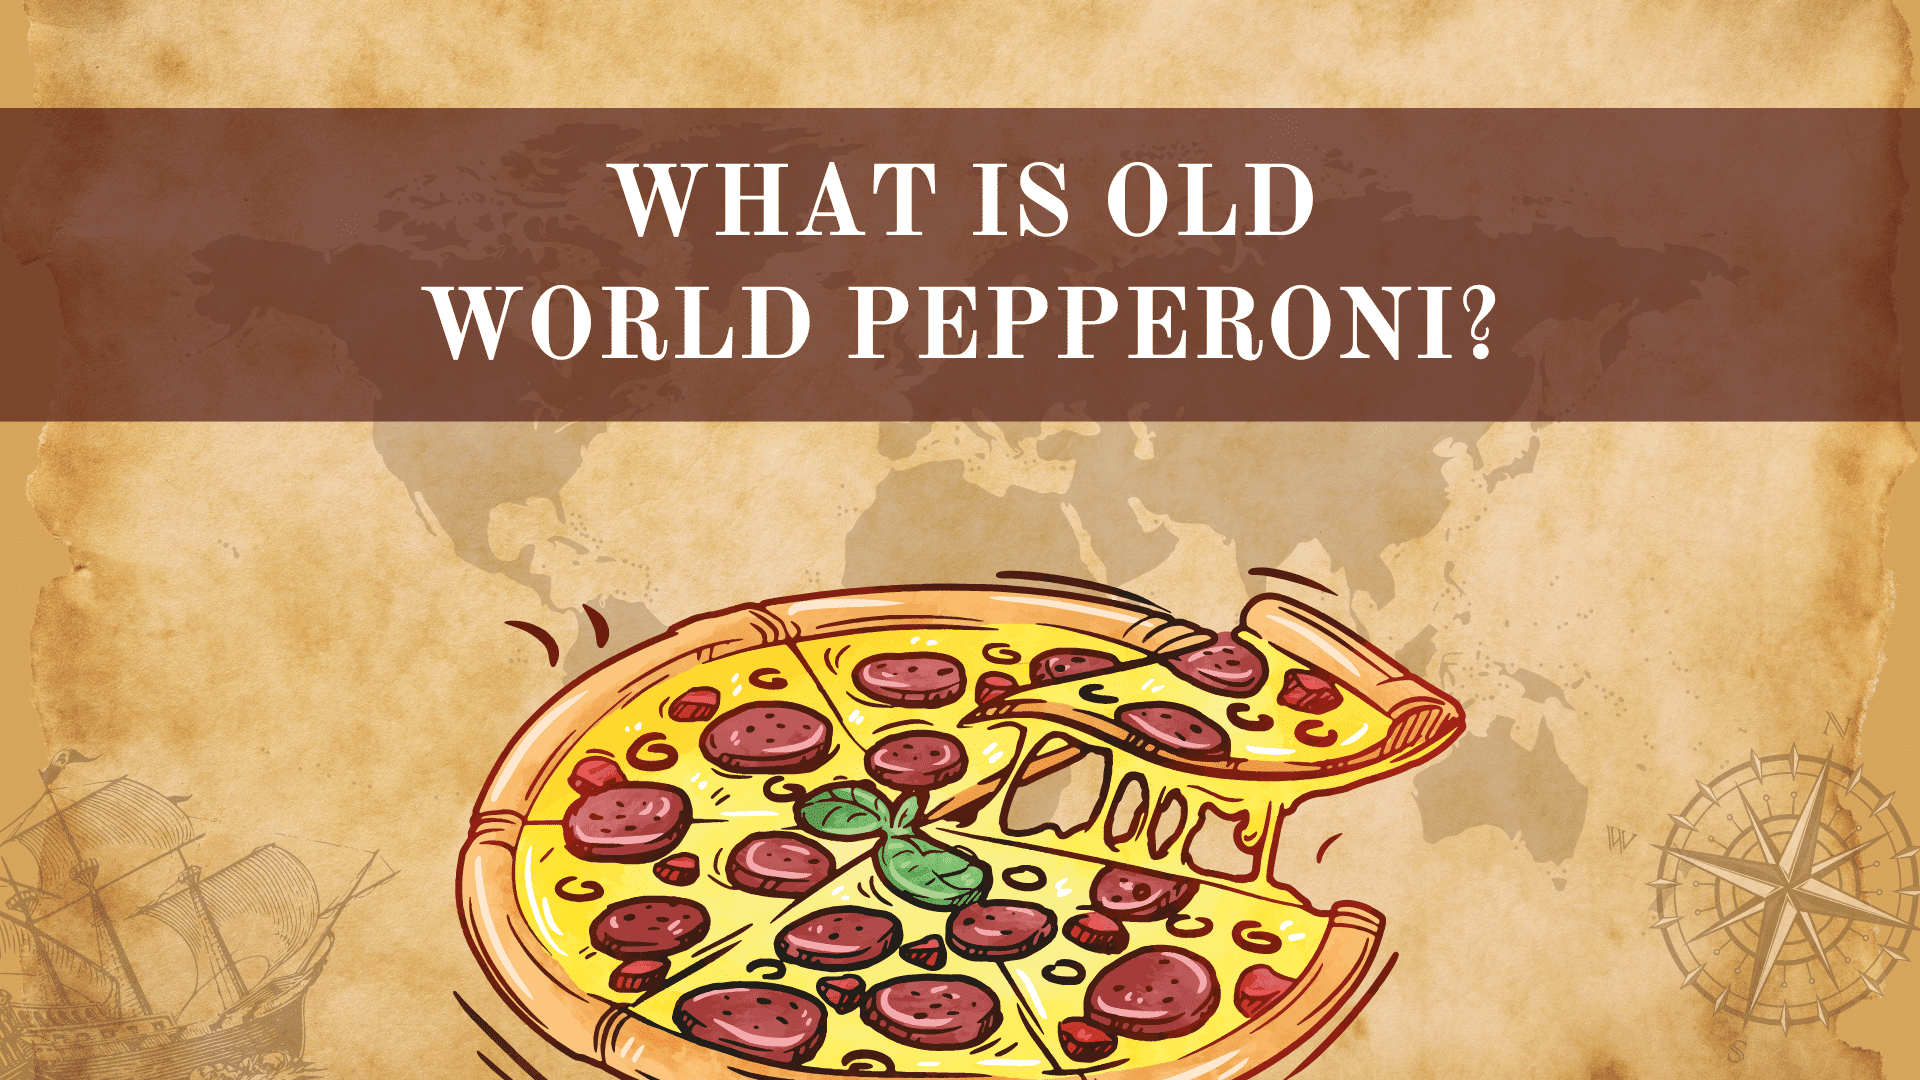 What is old world pepperoni